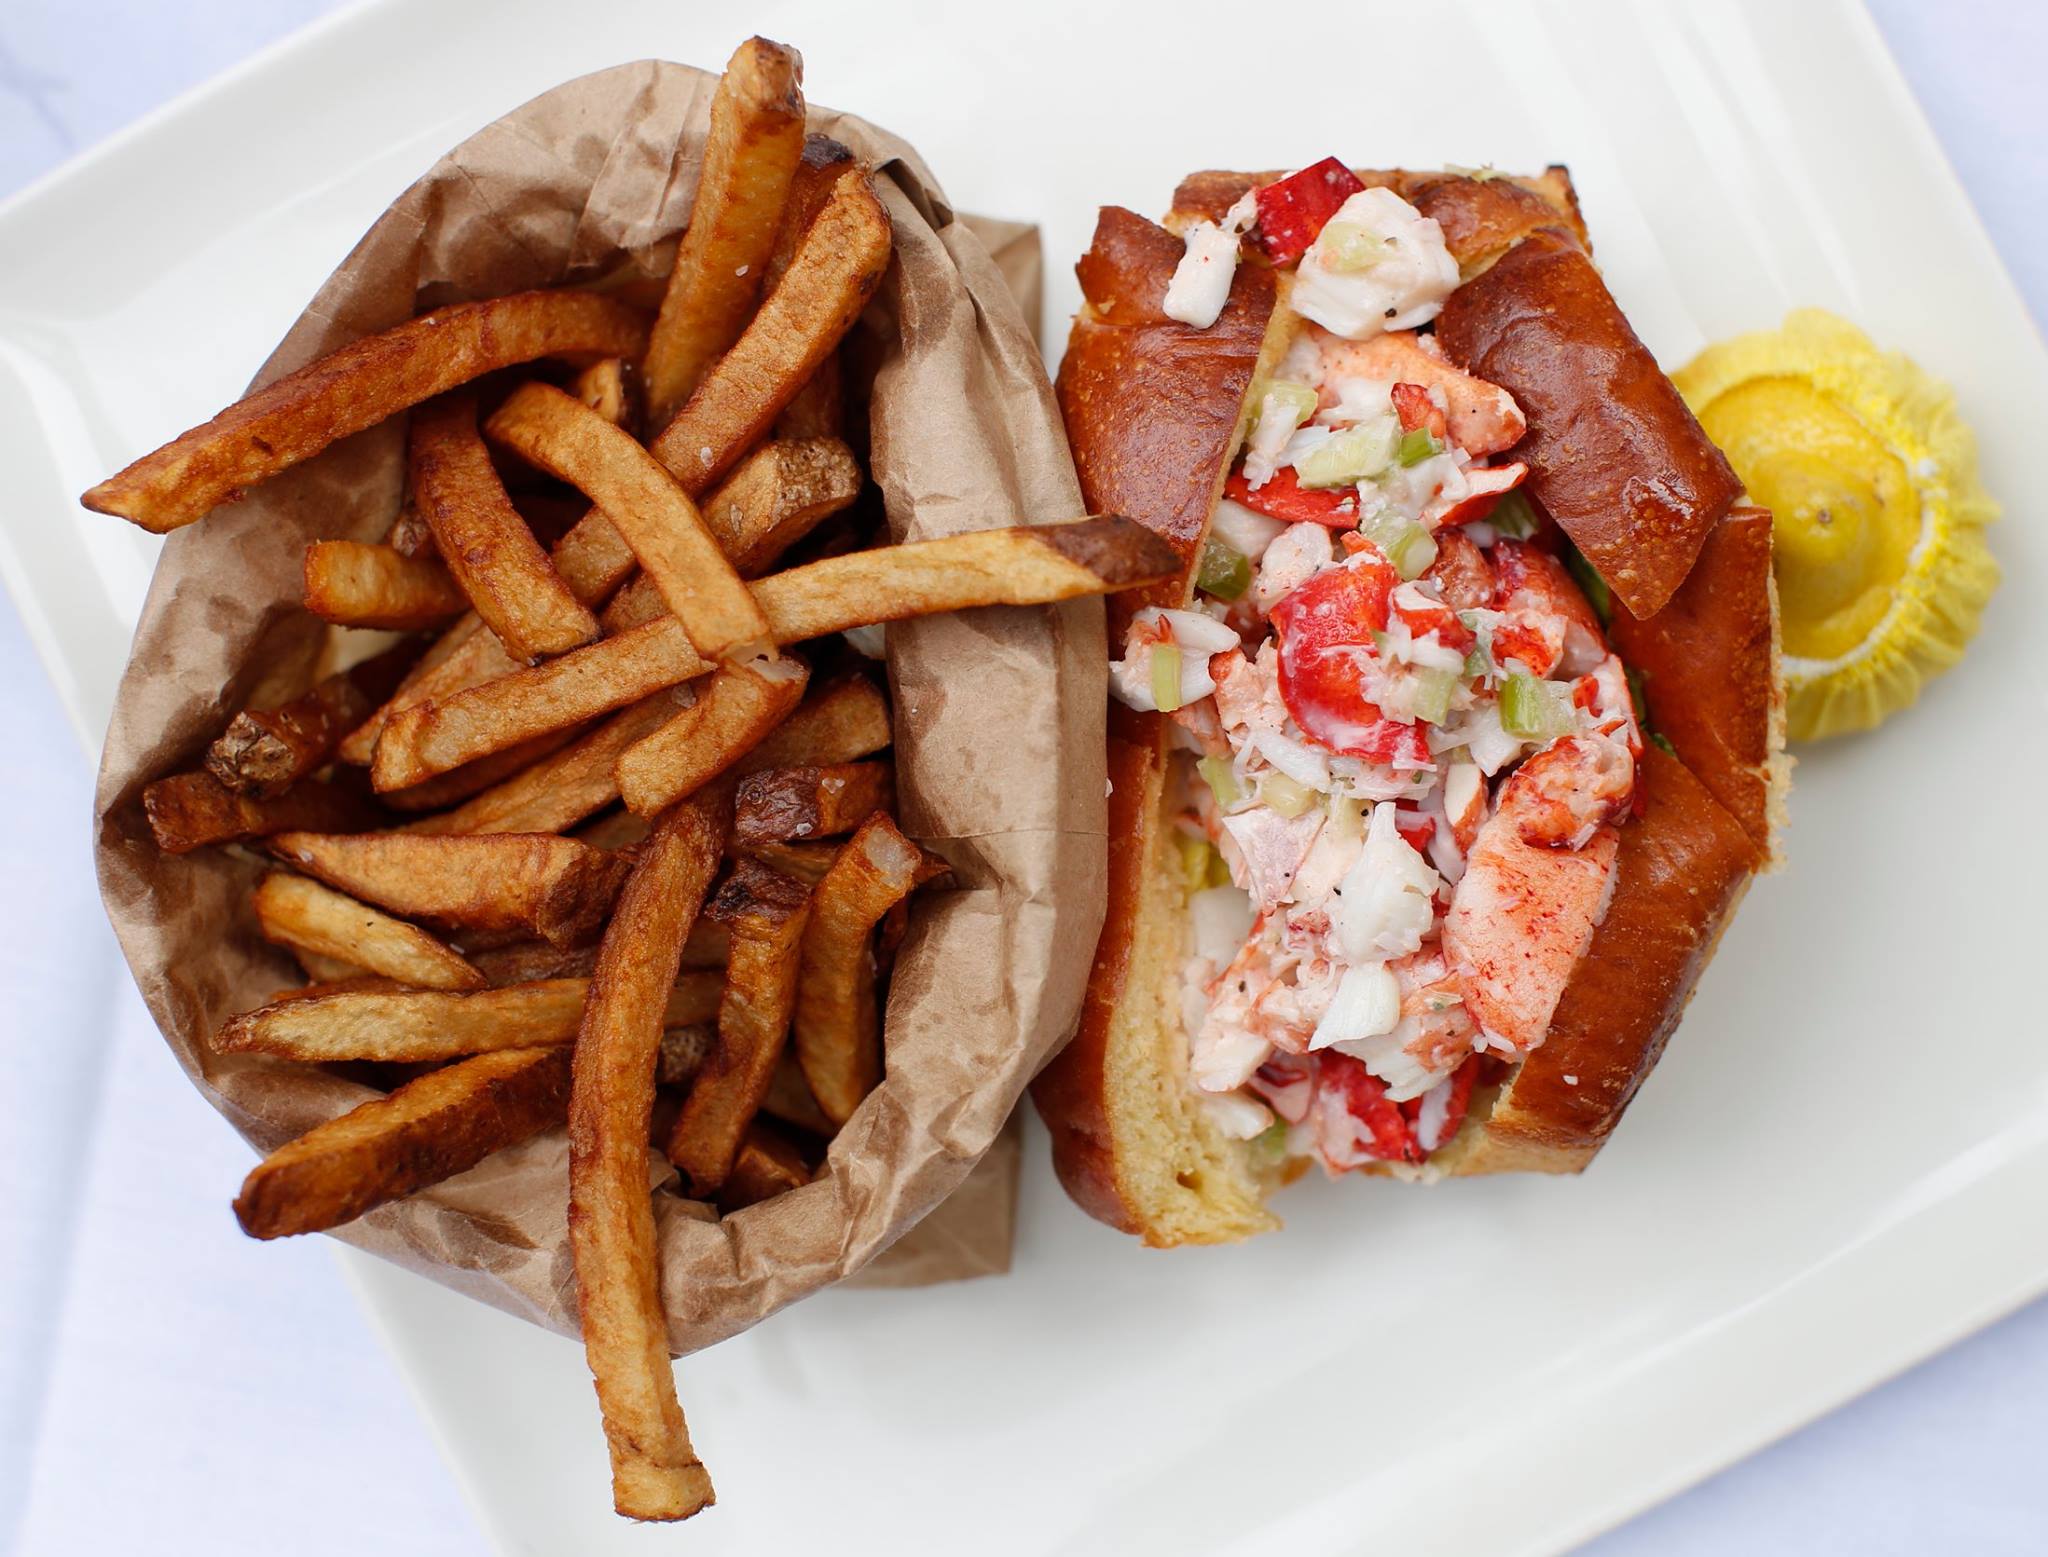 Lobster roll and fries